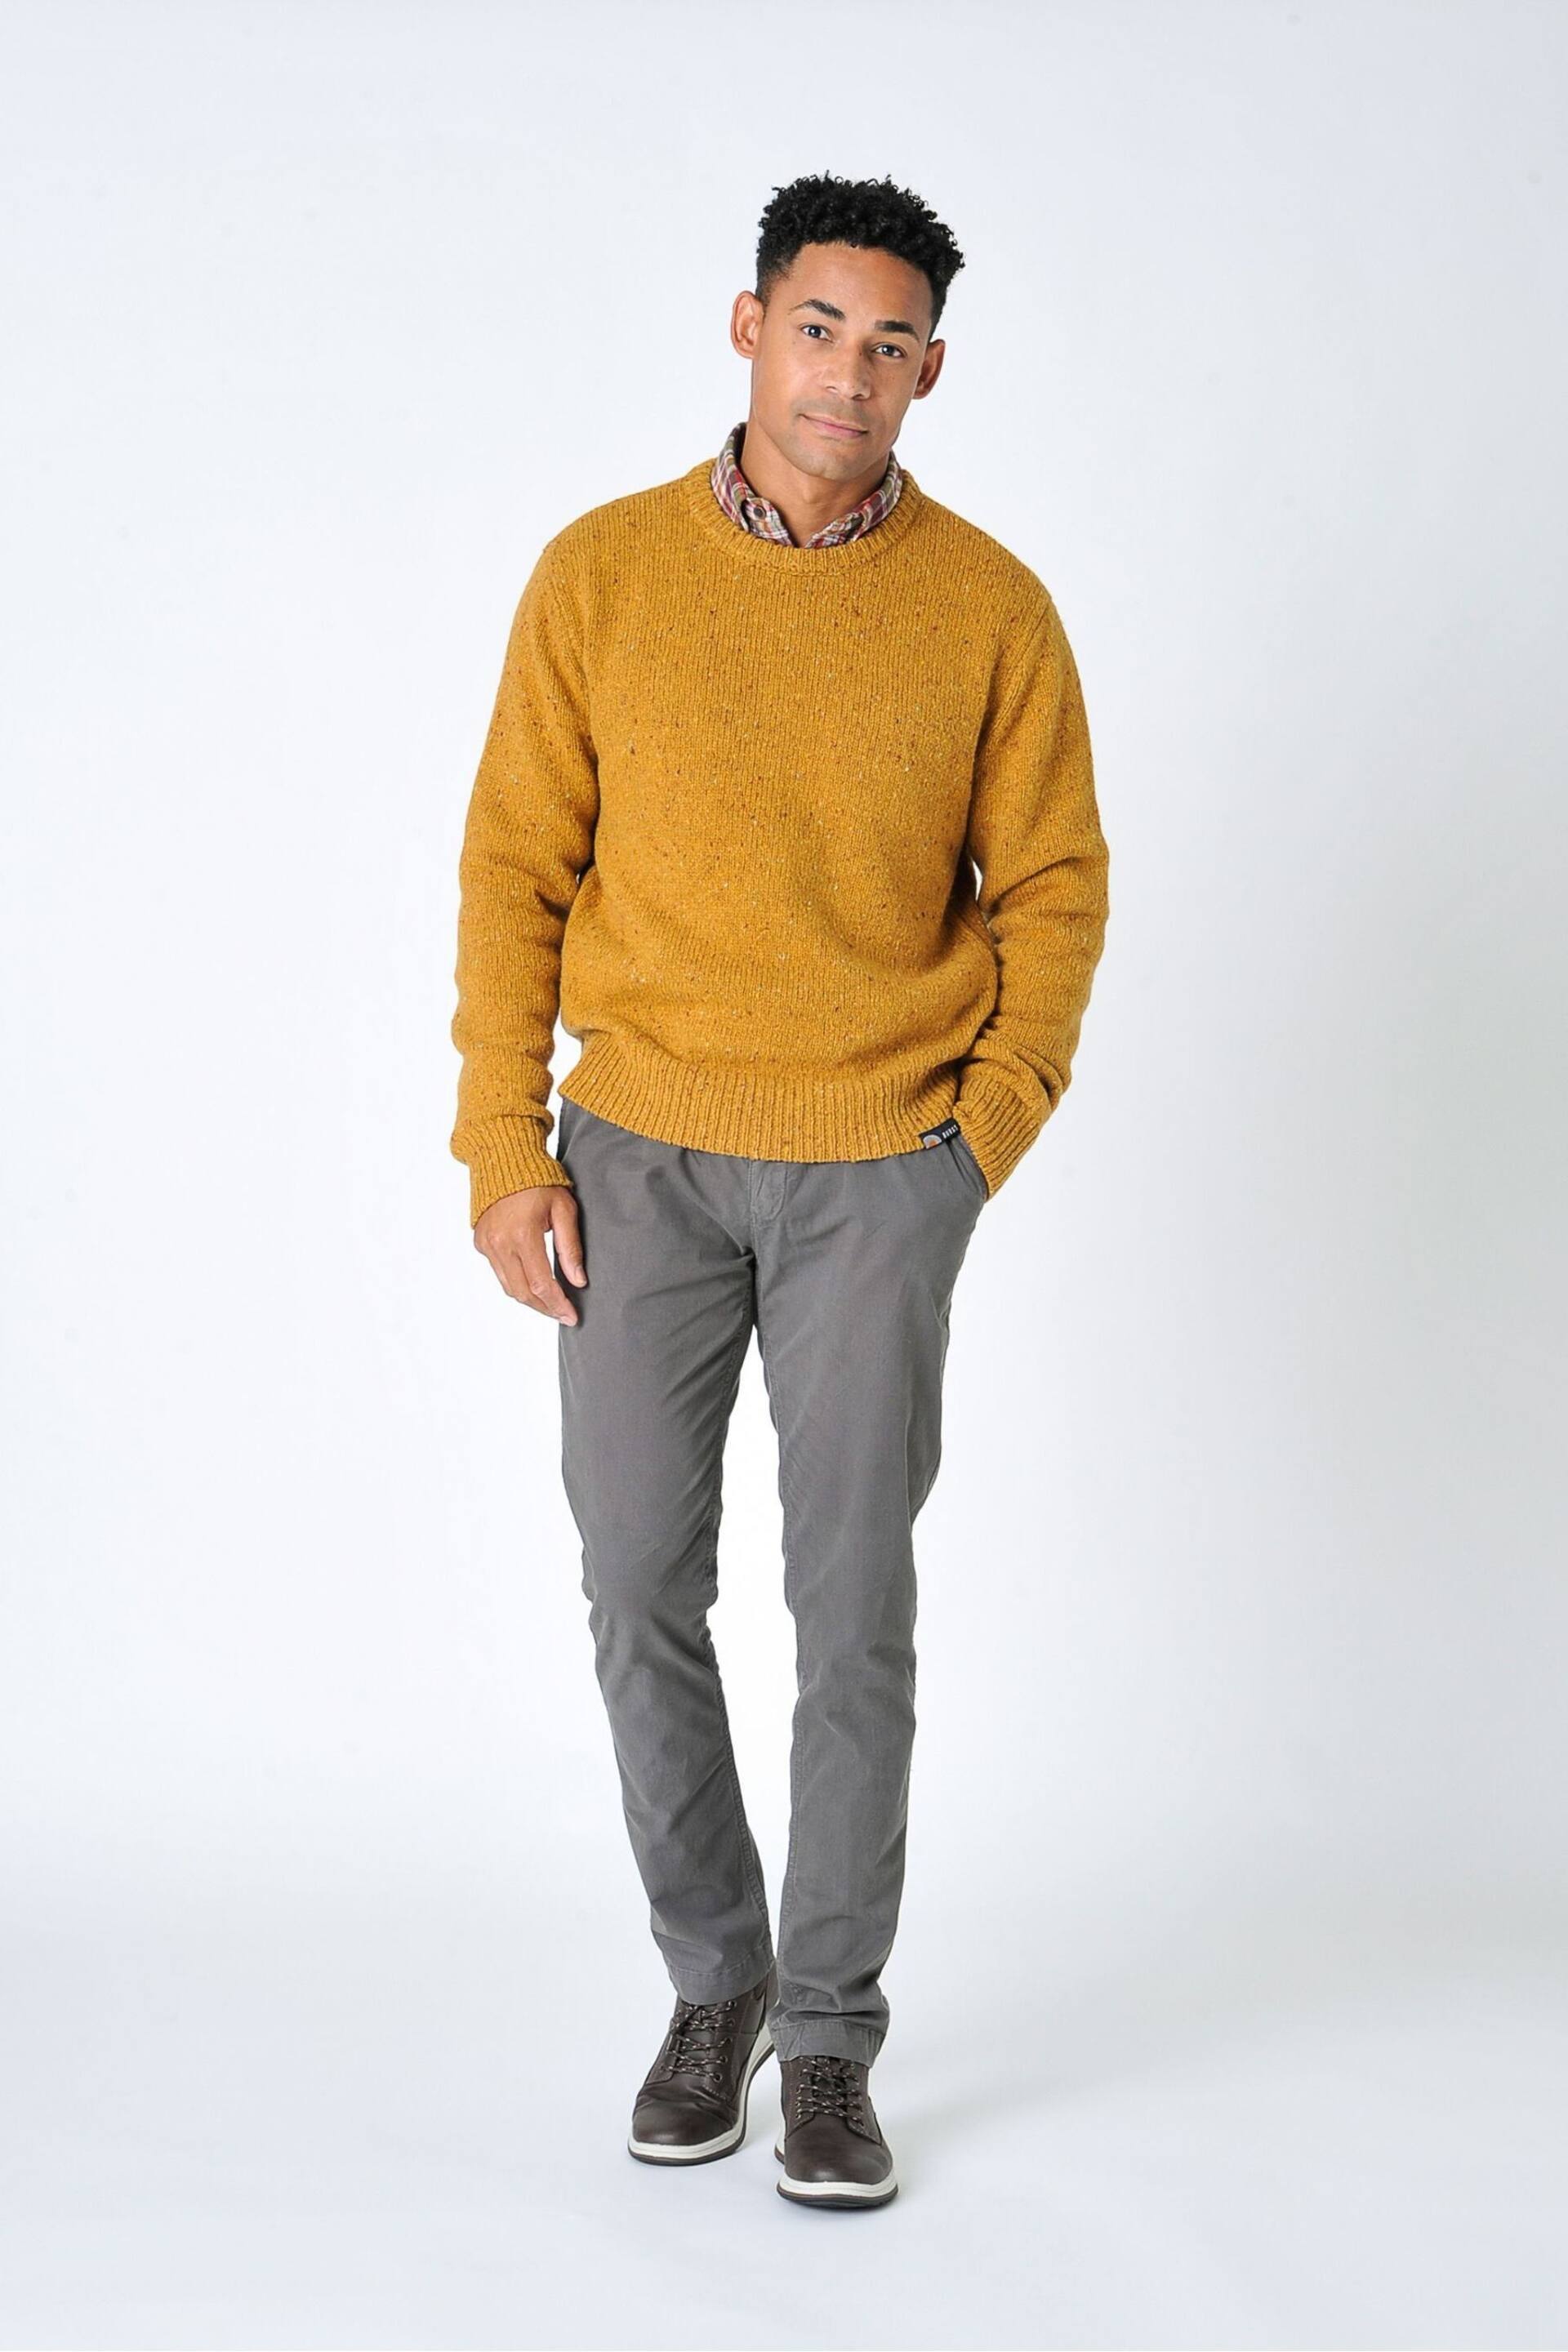 Burgs Mornick Mens Rich Neppy Knit Crew Neck Jumper - Image 4 of 6